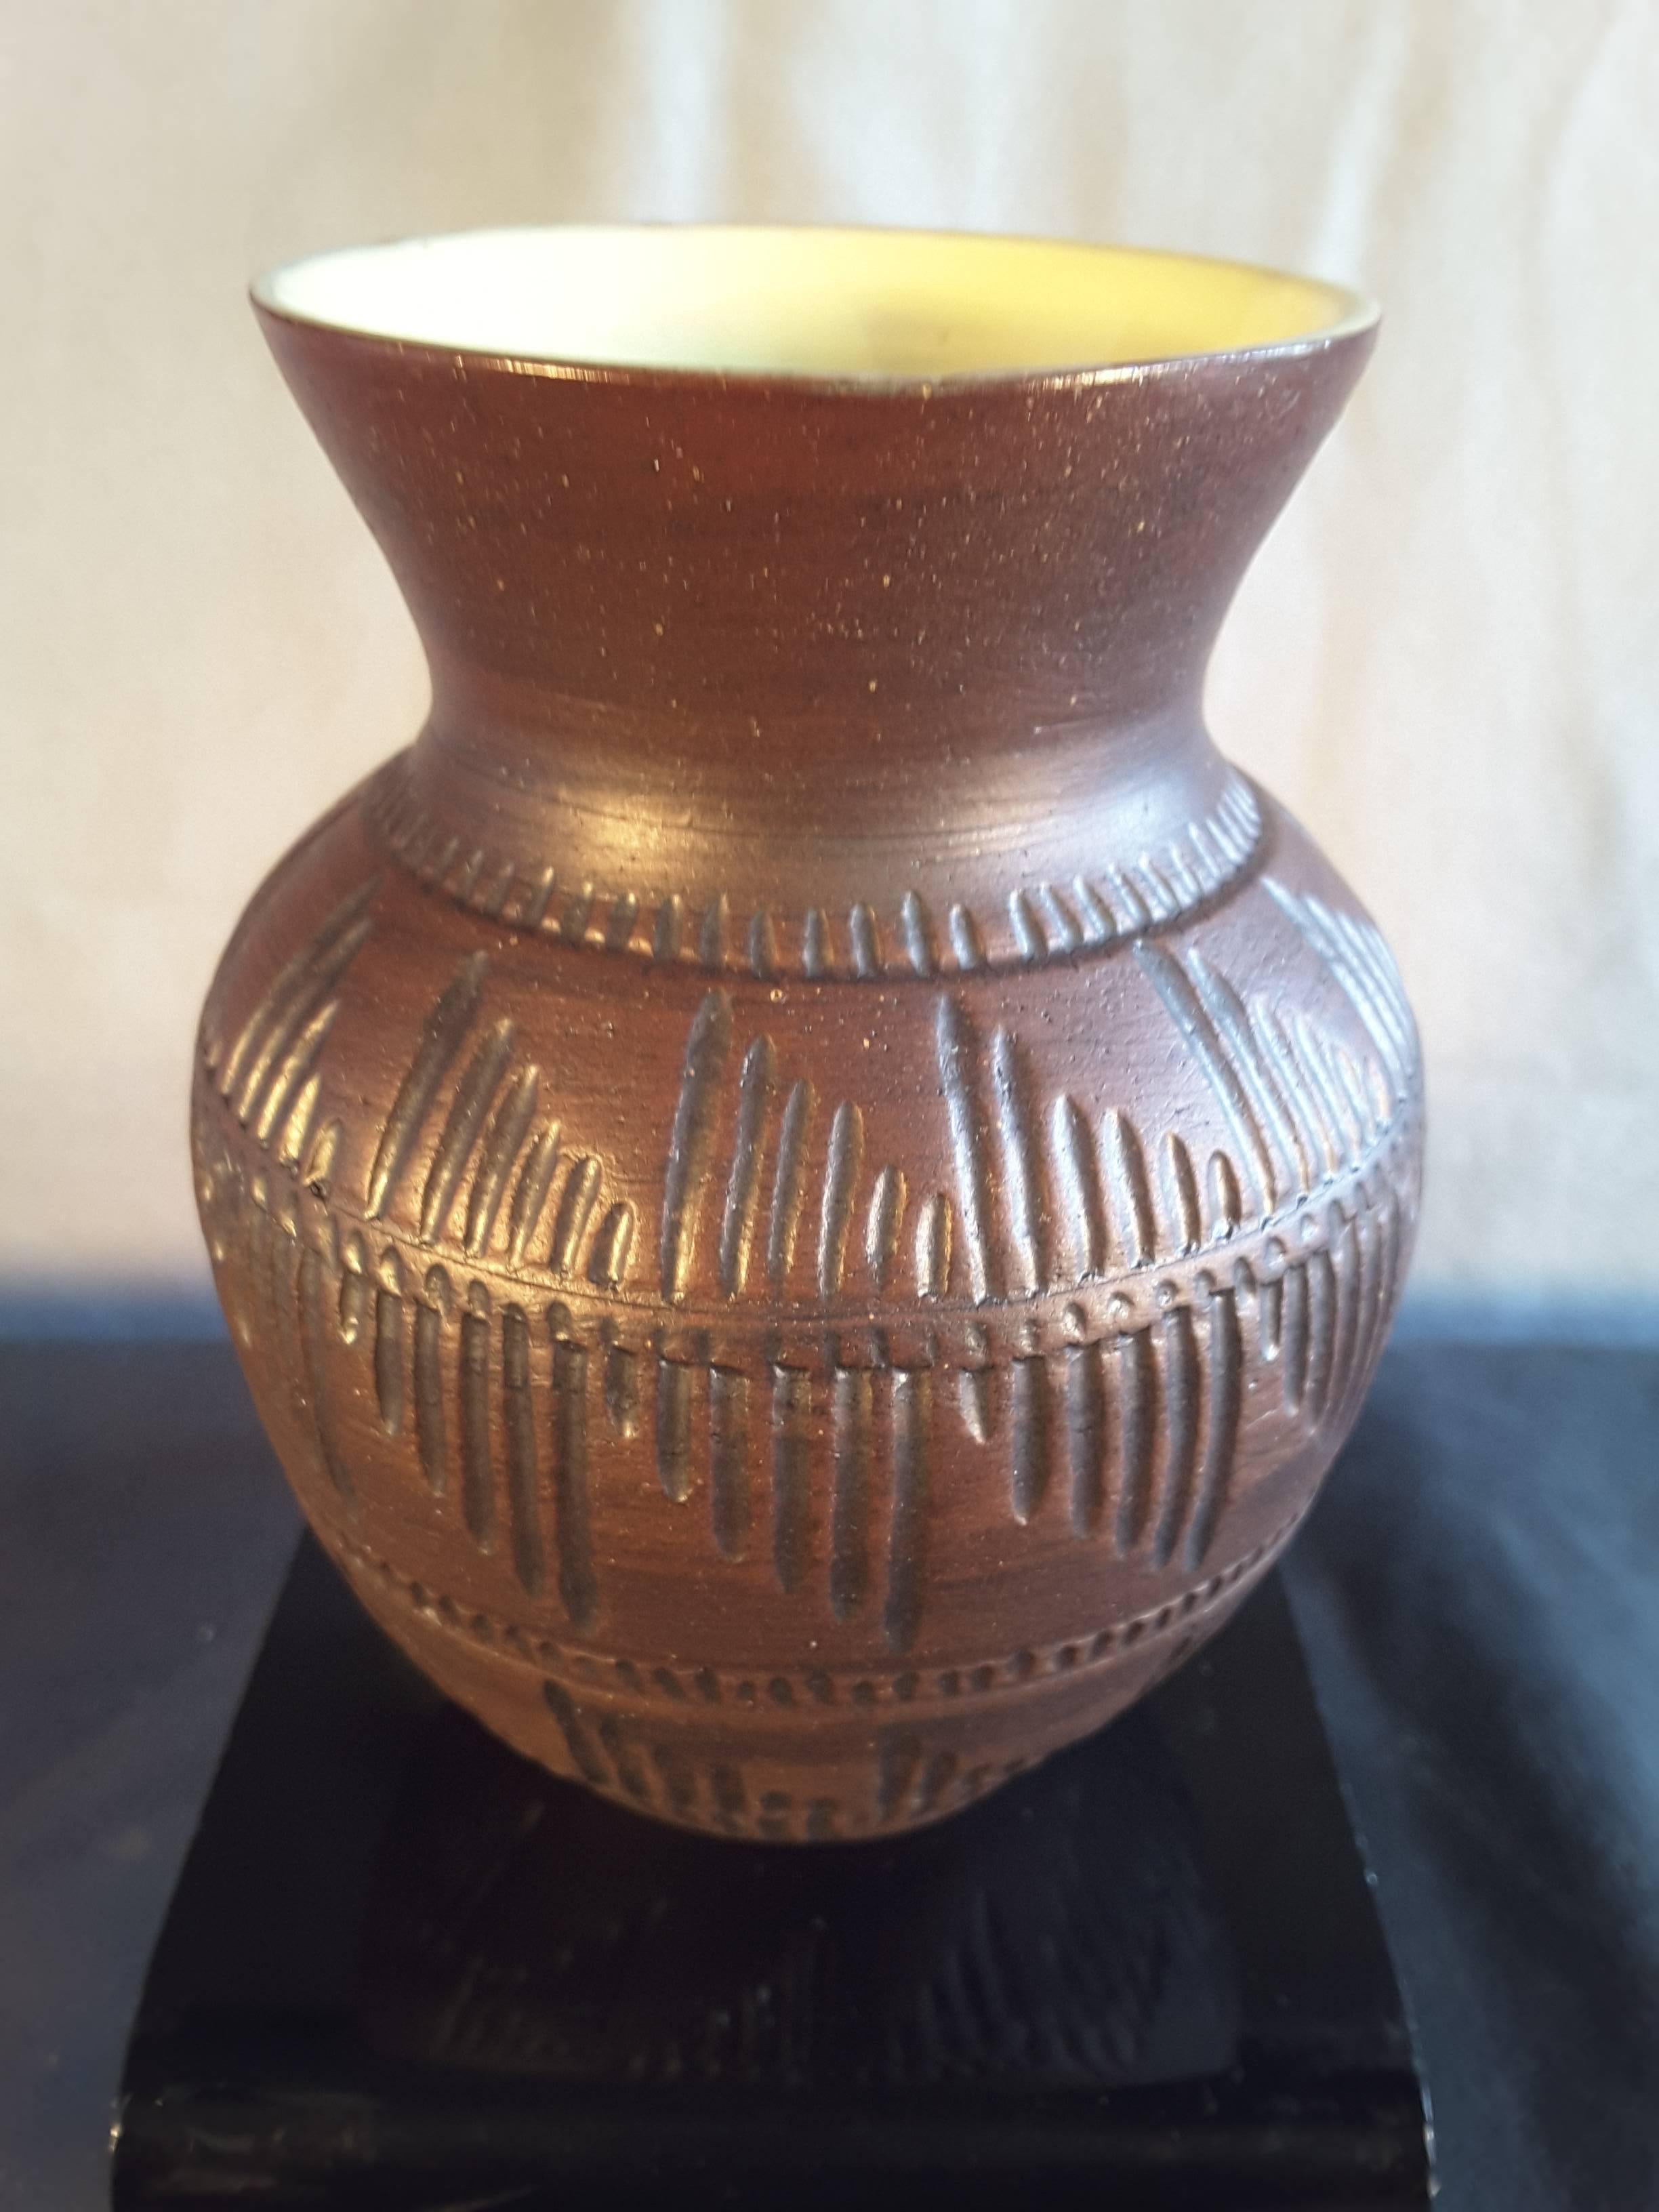 A six nations Native American pottery vase with yellow interior/brown incised decorated exterior, the vase is stamped on bottom with an eagle feather mark and S.N. plus S.4. & S, below. The vase measures 4 3/4" inches high x 4" inches